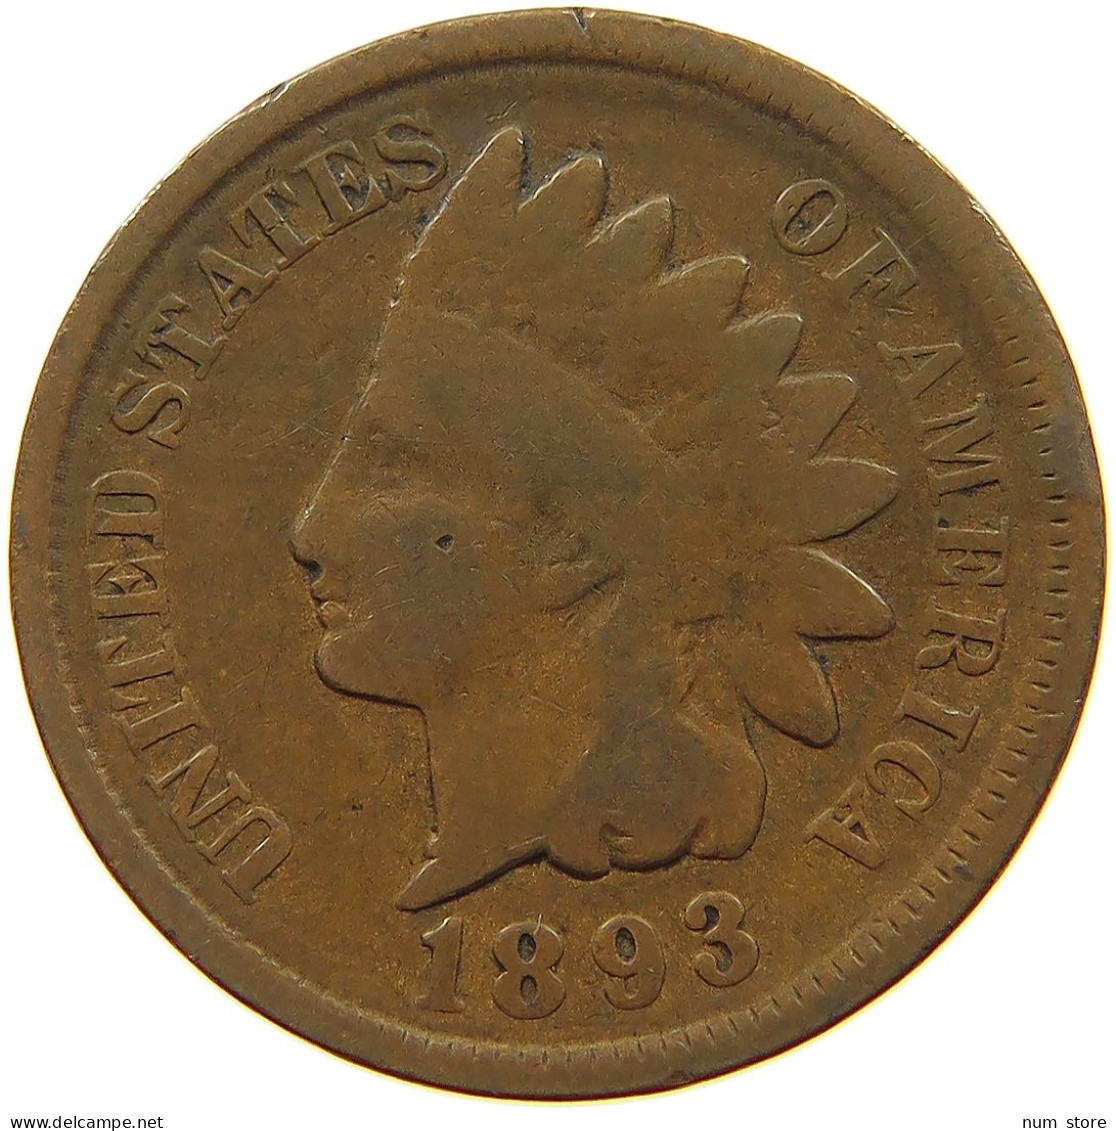 UNITED STATES OF AMERICA CENT 1893 INDIAN HEAD #s063 0197 - 1859-1909: Indian Head